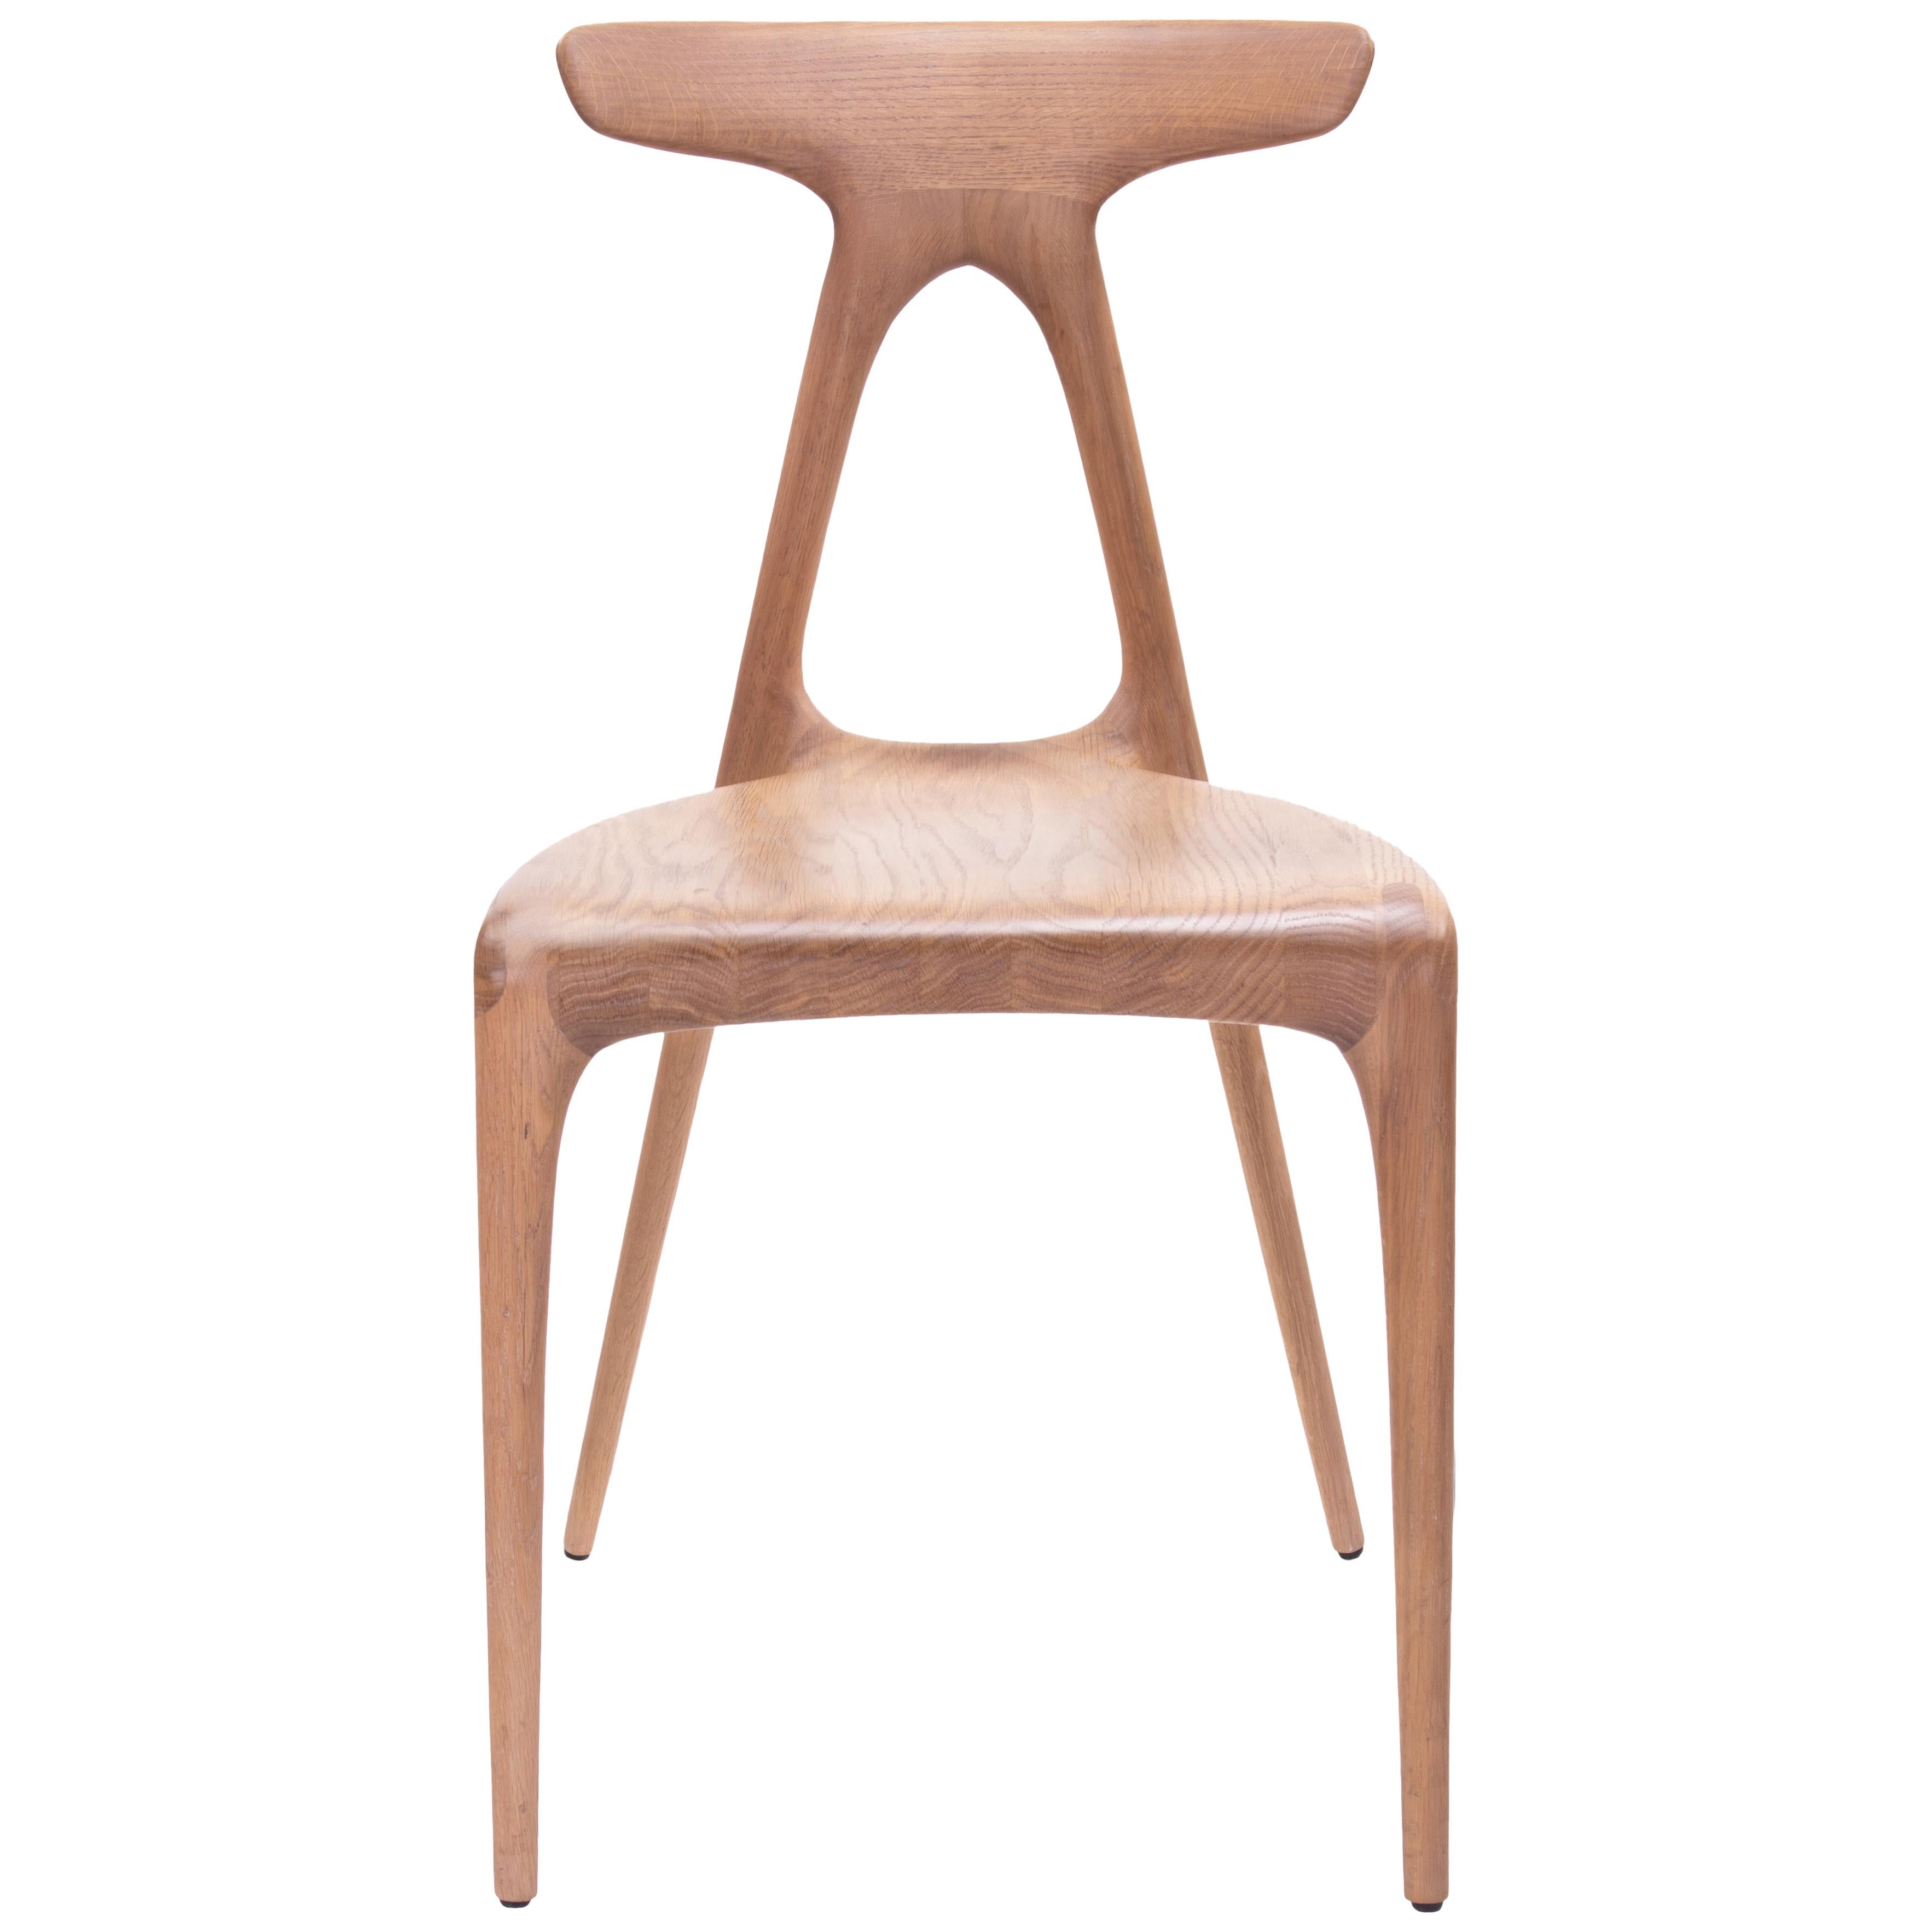 Alpha, Solid Oak Stackable Contemporary Dining Chair by Made in Ratio